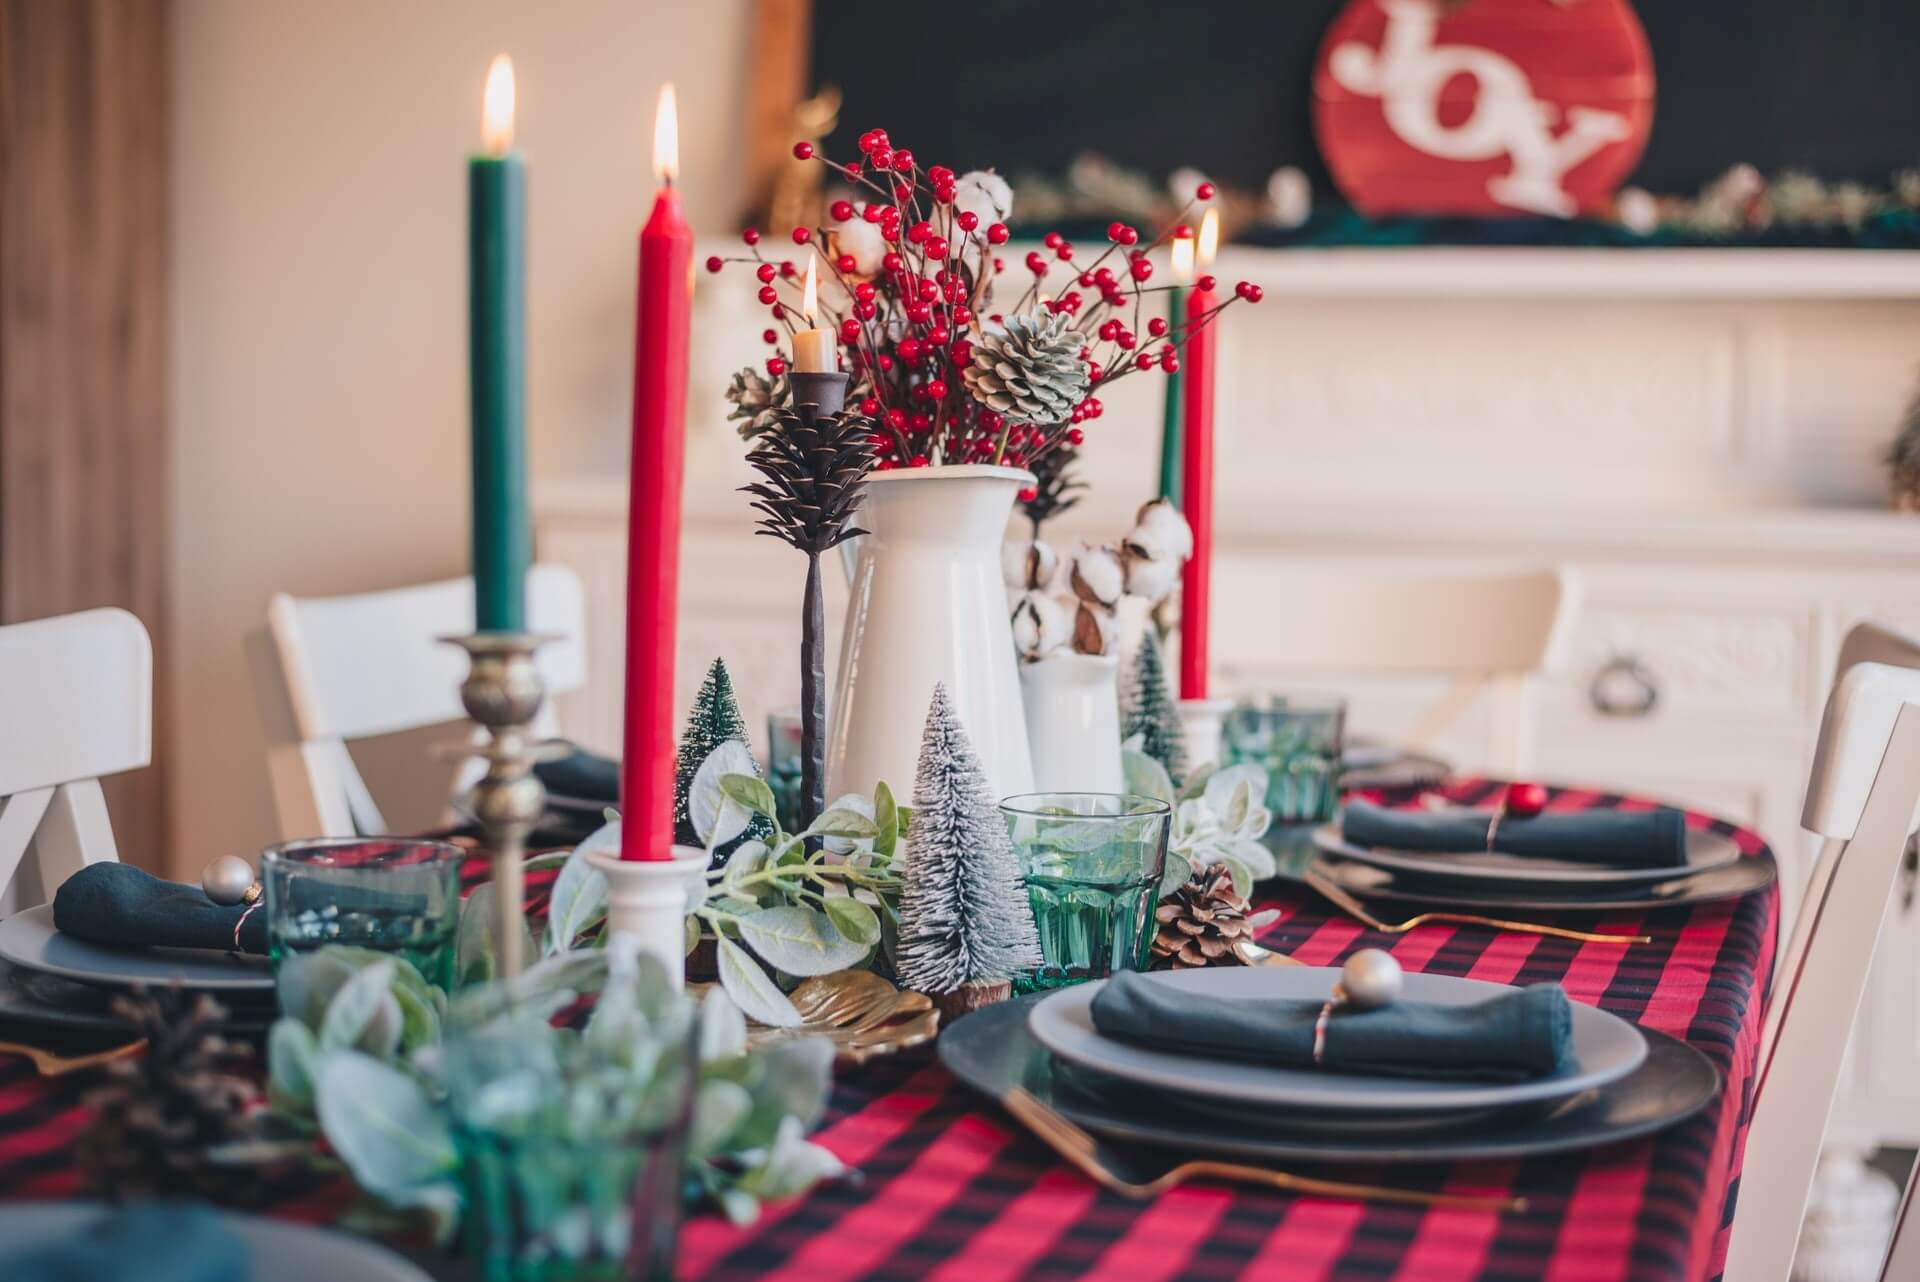 10 Tips to Make your Home Cozier for the Holidays